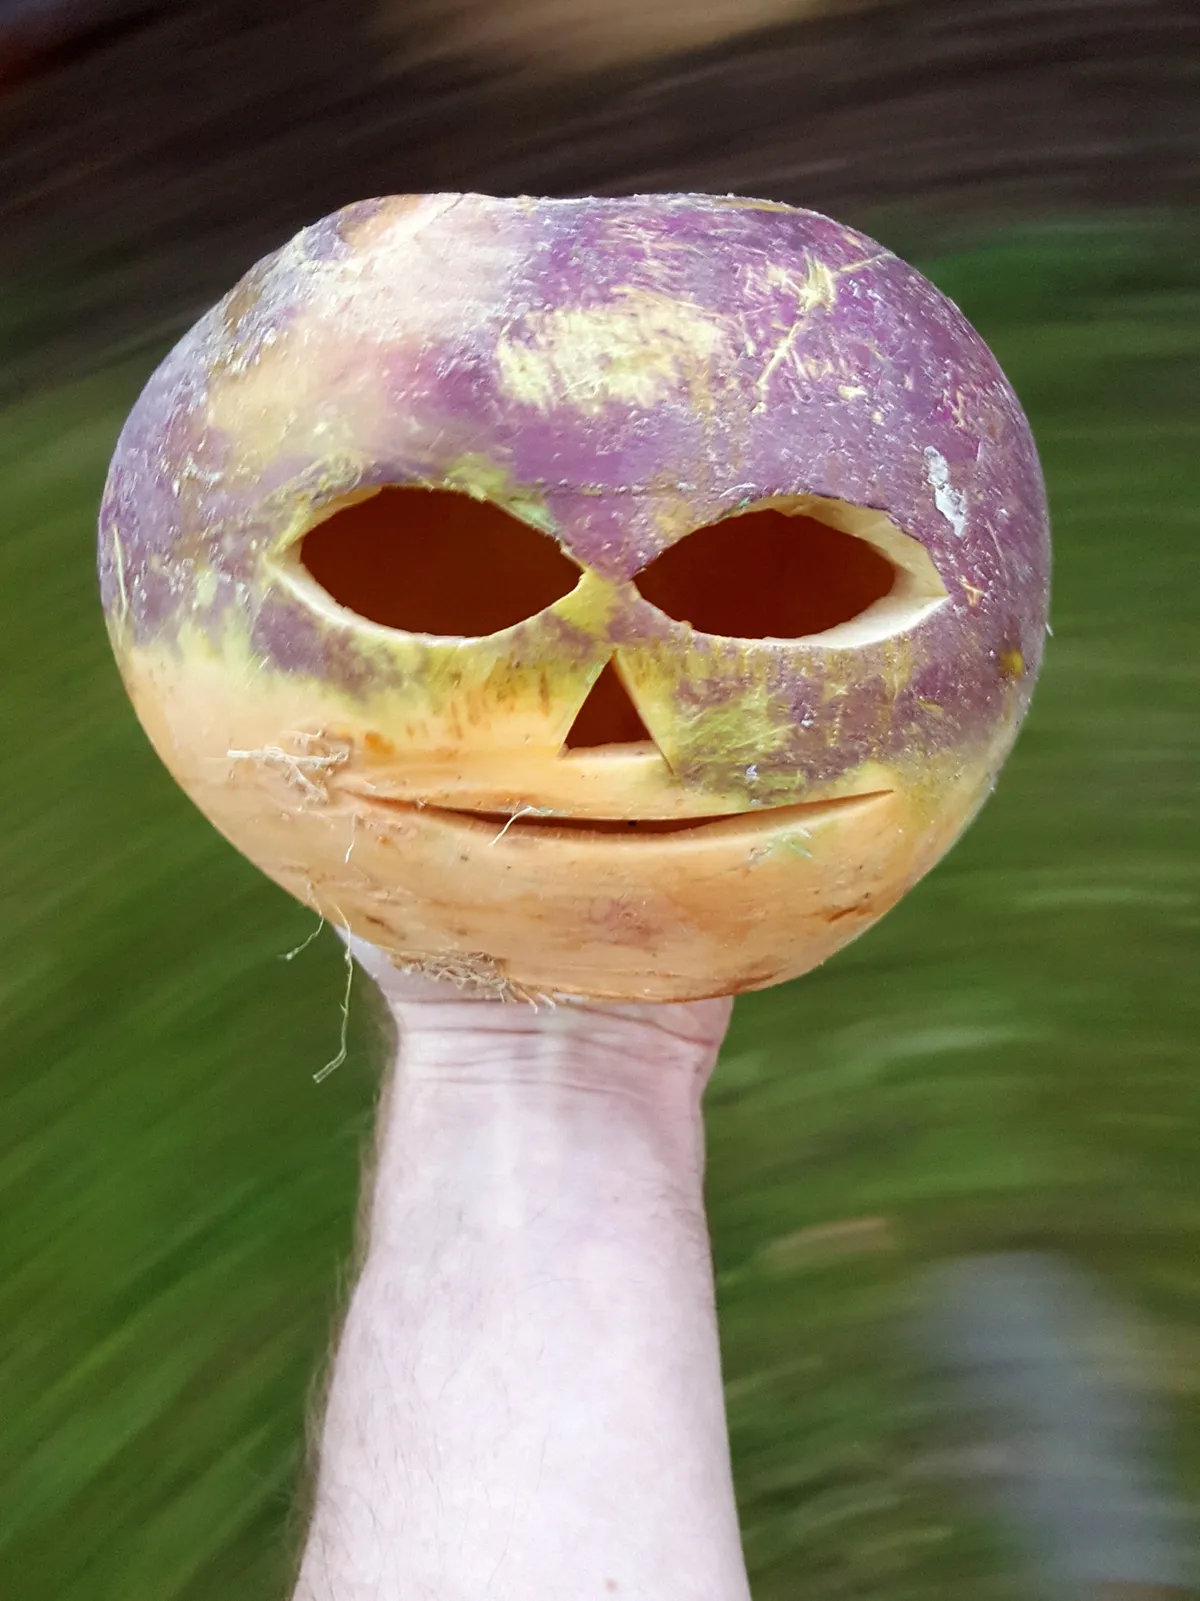 A hand holding a turnip against a blurred background. The turnip has a face carved into it.